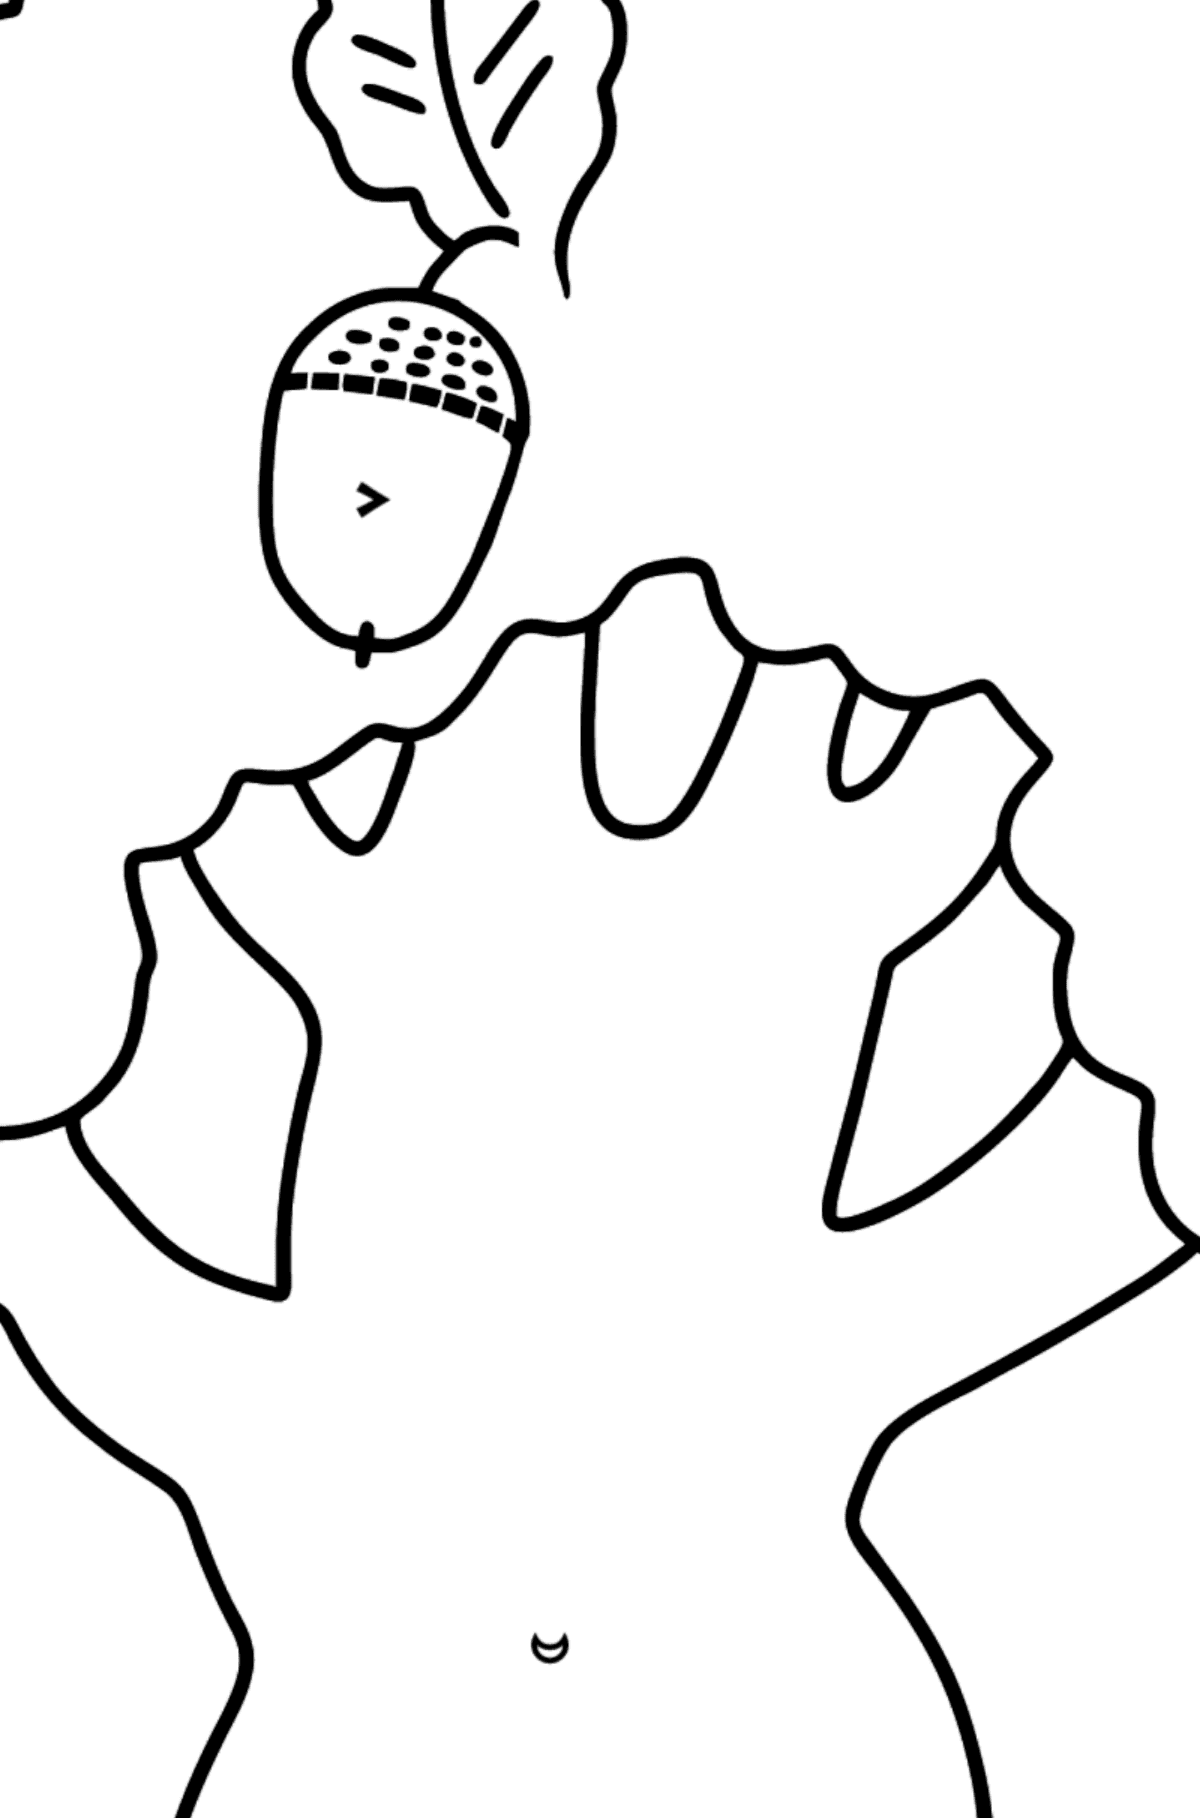 Oak coloring page - Simple  - Coloring by Symbols for Kids